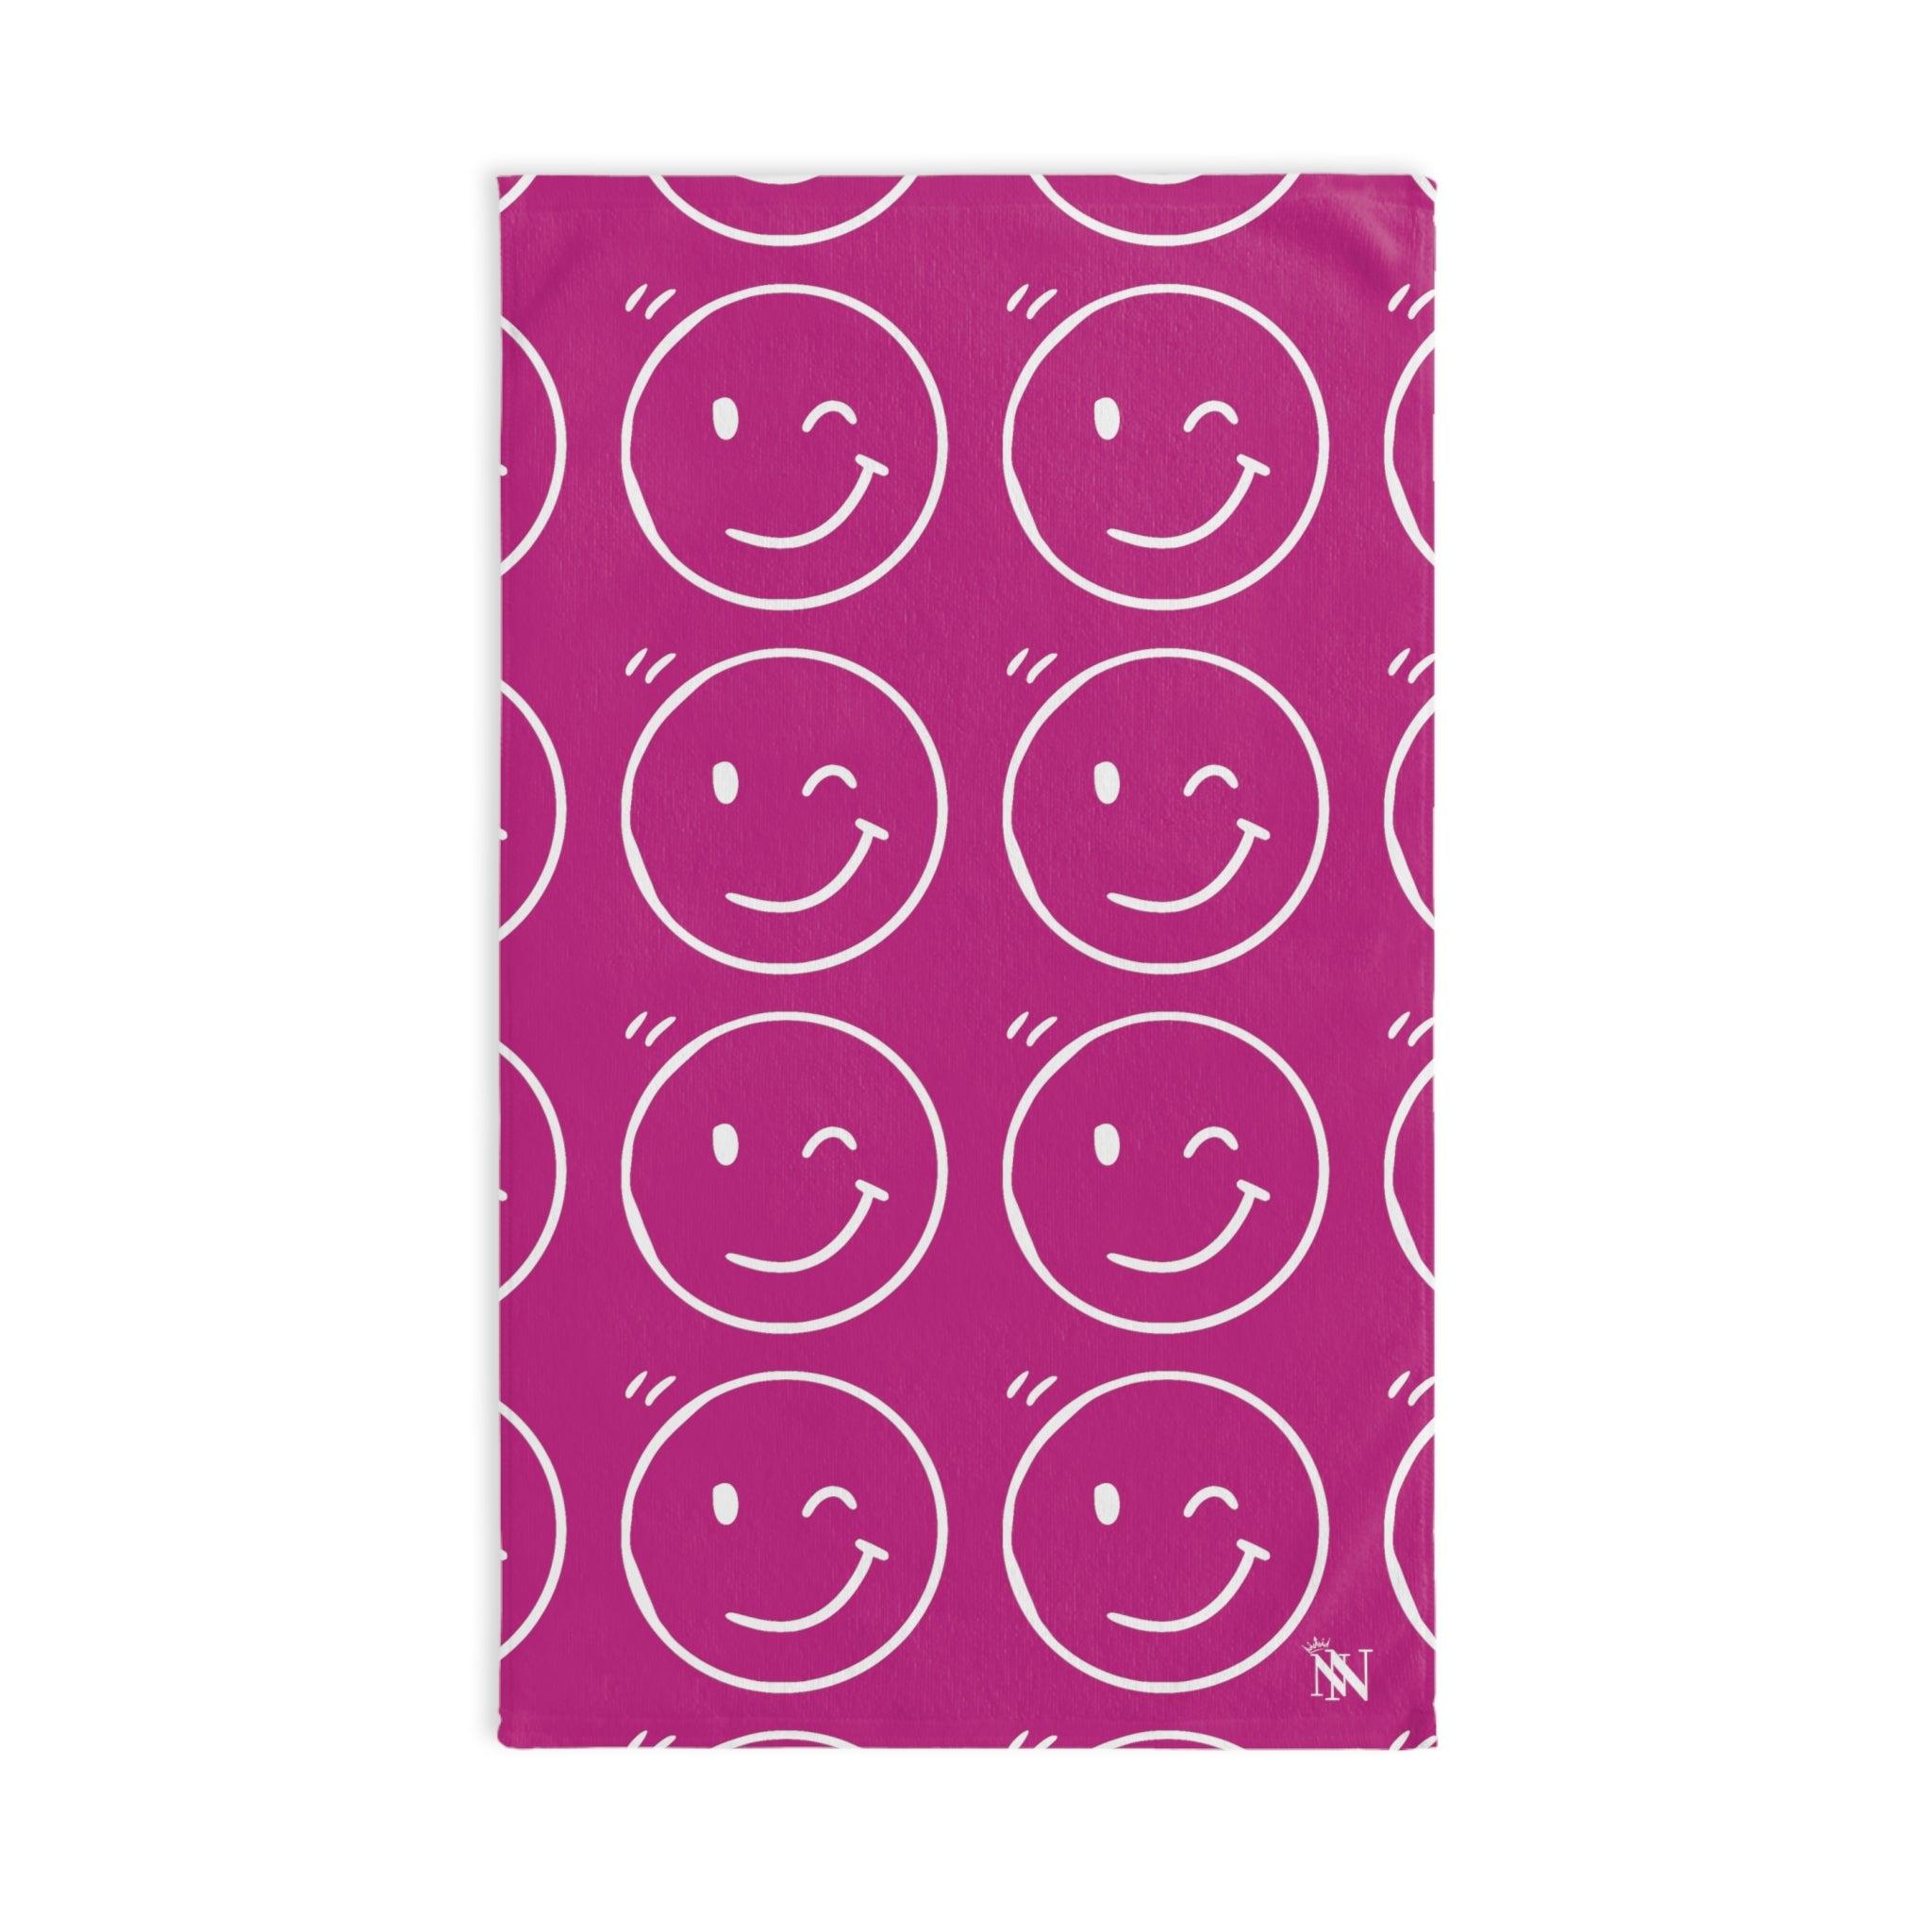 Wink  Pattern White Fuscia | Funny Gifts for Men - Gifts for Him - Birthday Gifts for Men, Him, Husband, Boyfriend, New Couple Gifts, Fathers & Valentines Day Gifts, Hand Towels NECTAR NAPKINS